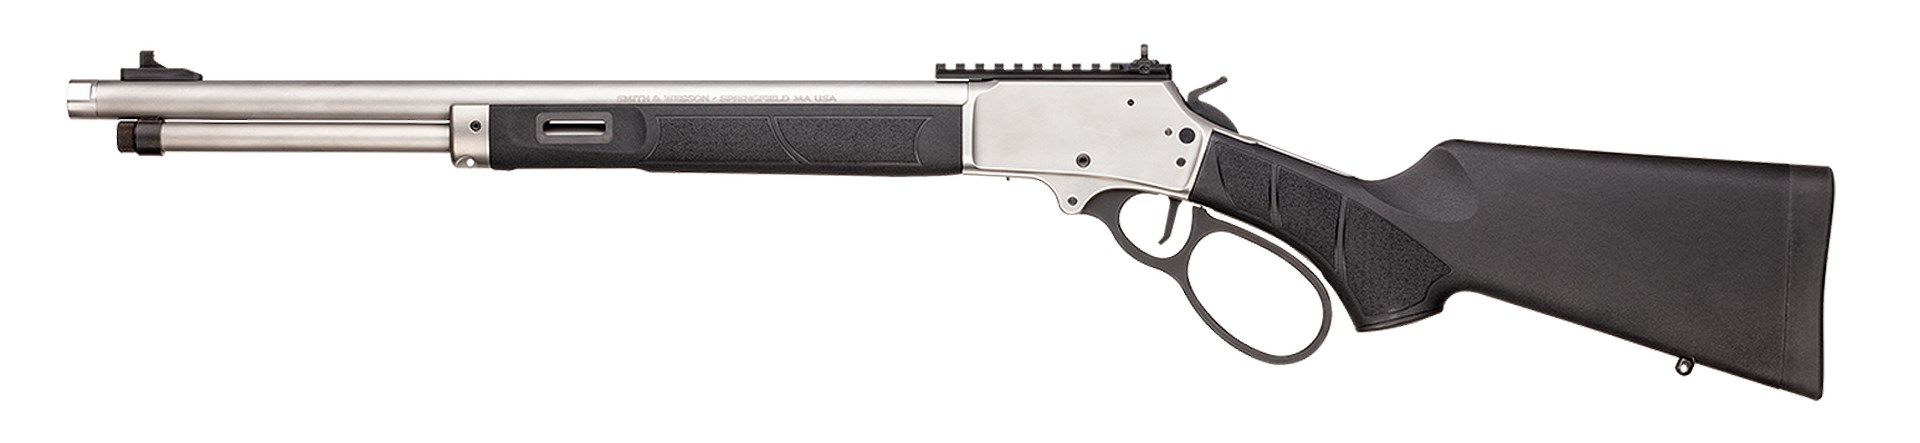 left-side view smith & wesson 1854 series stainless steel tactical lever-action rifle on white background